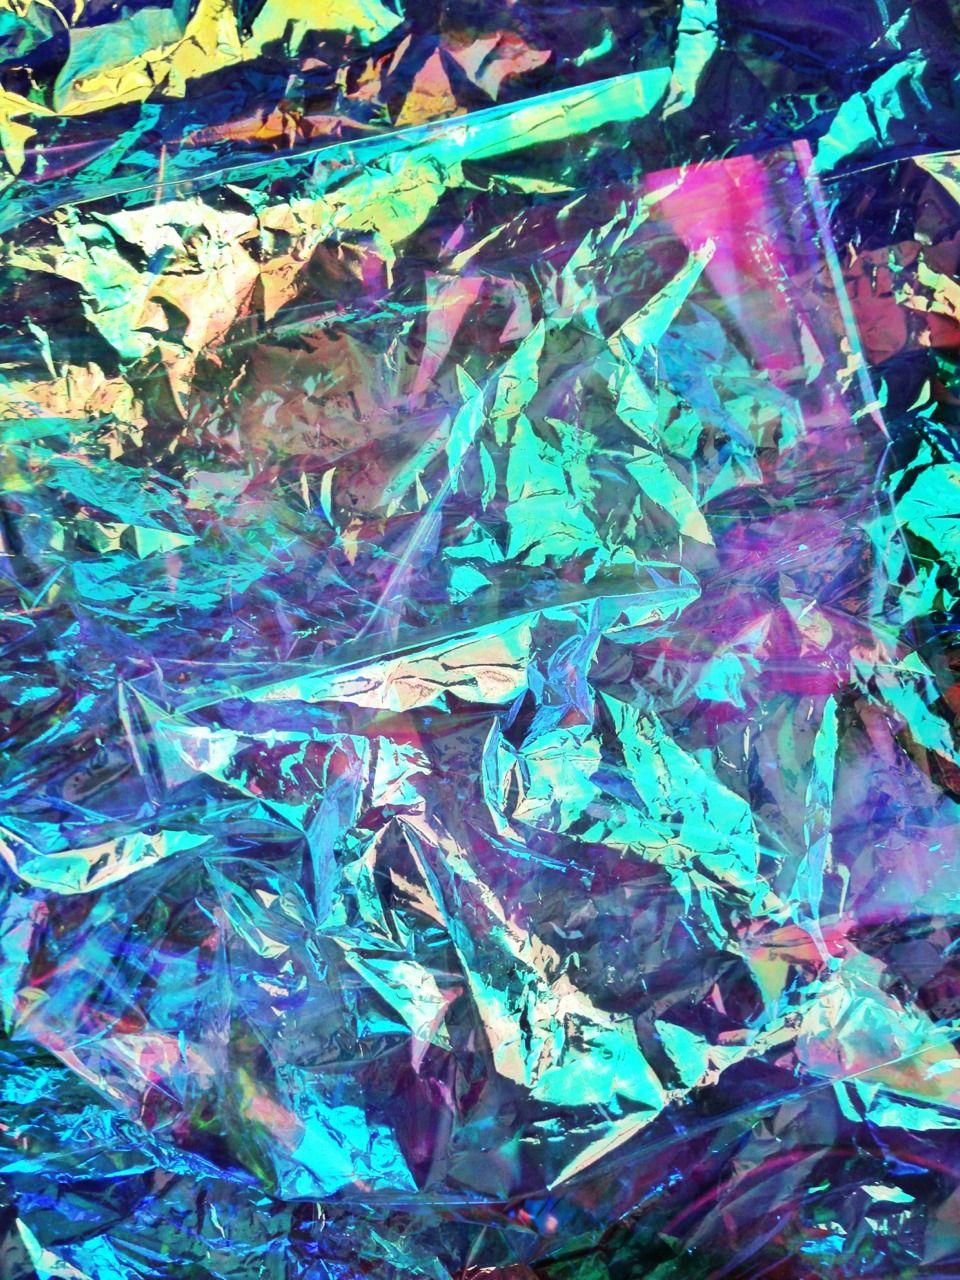 image about iridescent. See more about grunge